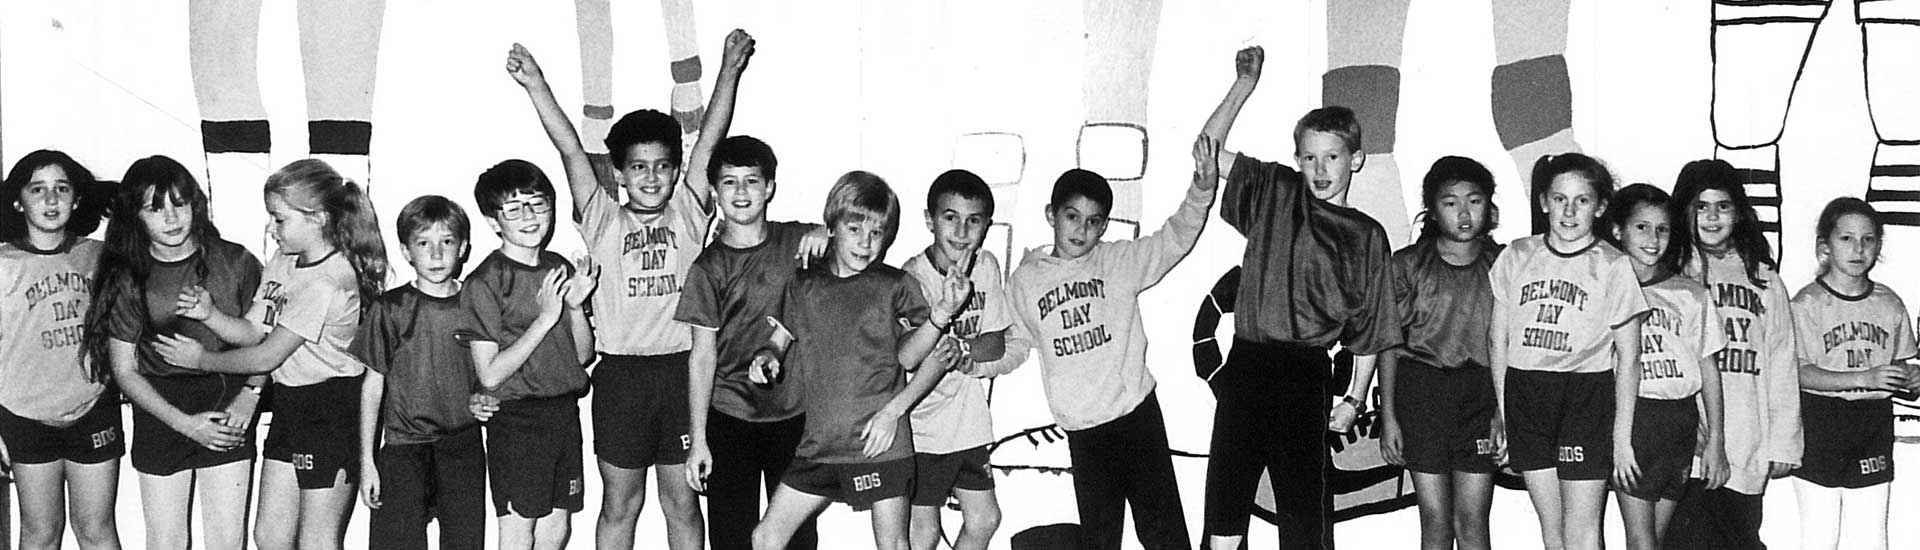 A black and white archival photos of students wearing Belmont Day School shirts and cheering on field day.